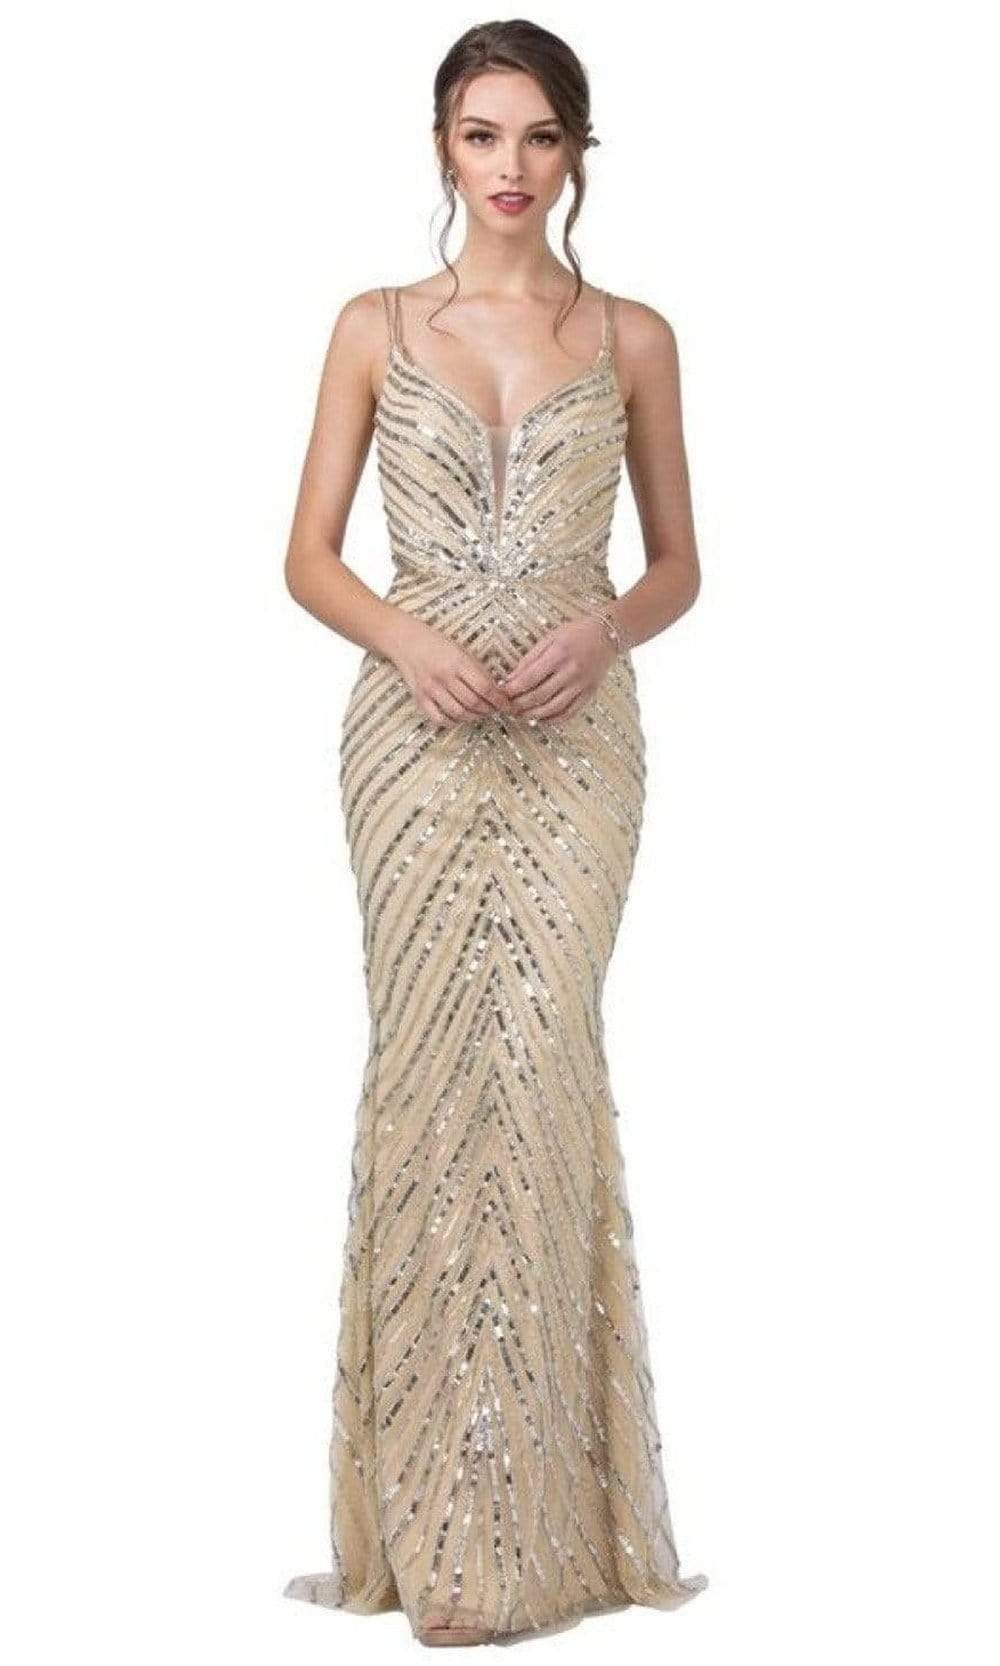 Aspeed Design - L2209 Strappy Back Sequined Sheath Dress
